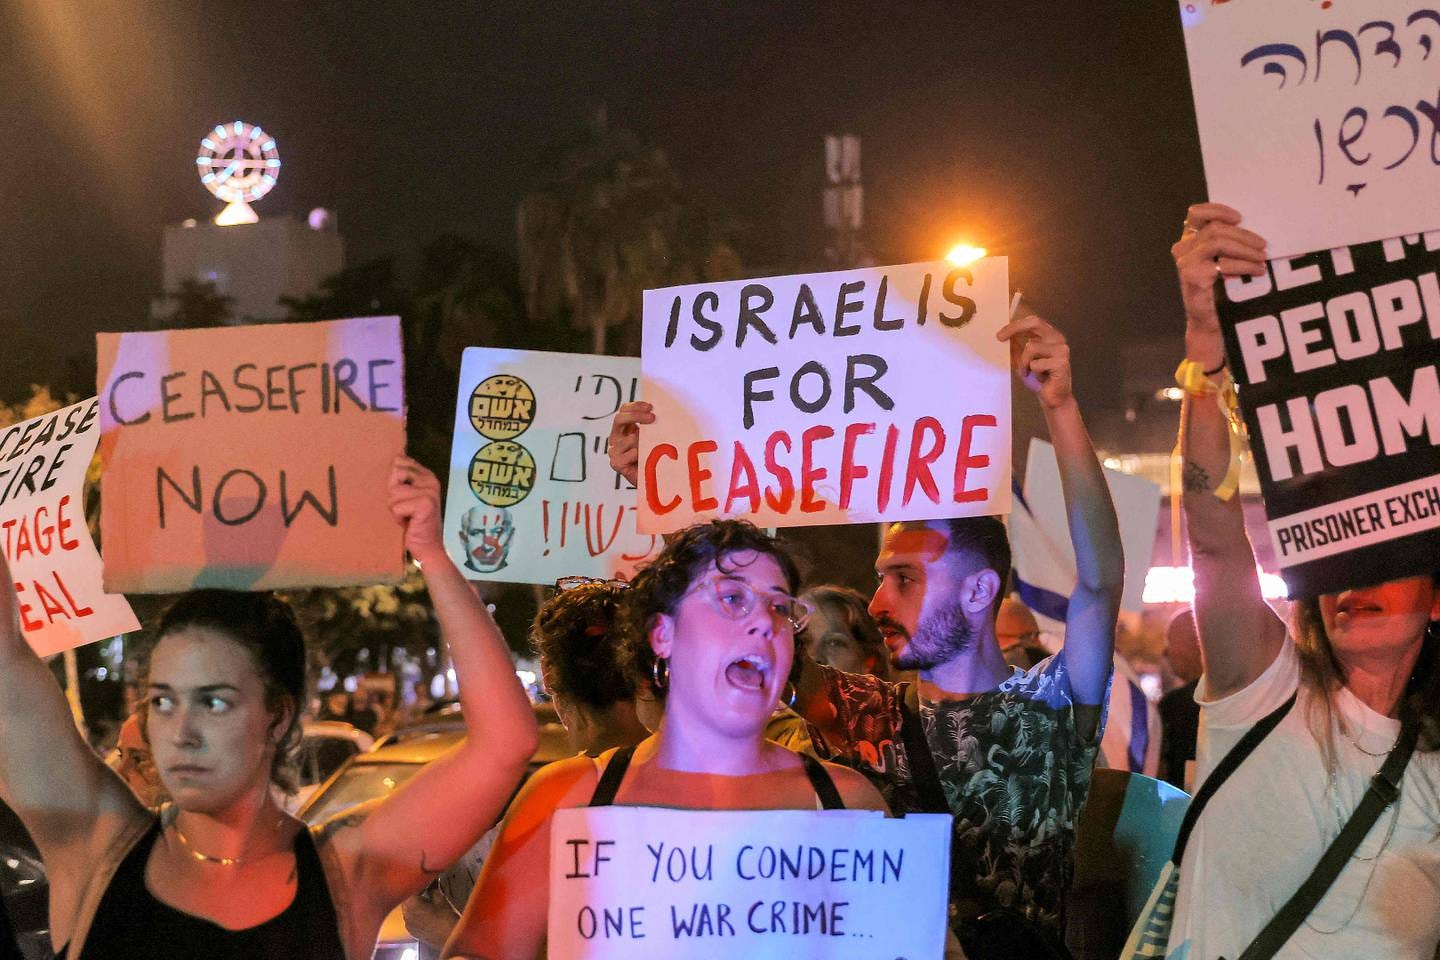 Israeli protesters demand ceasefire as Netanyahu vows 'long and difficult'  war